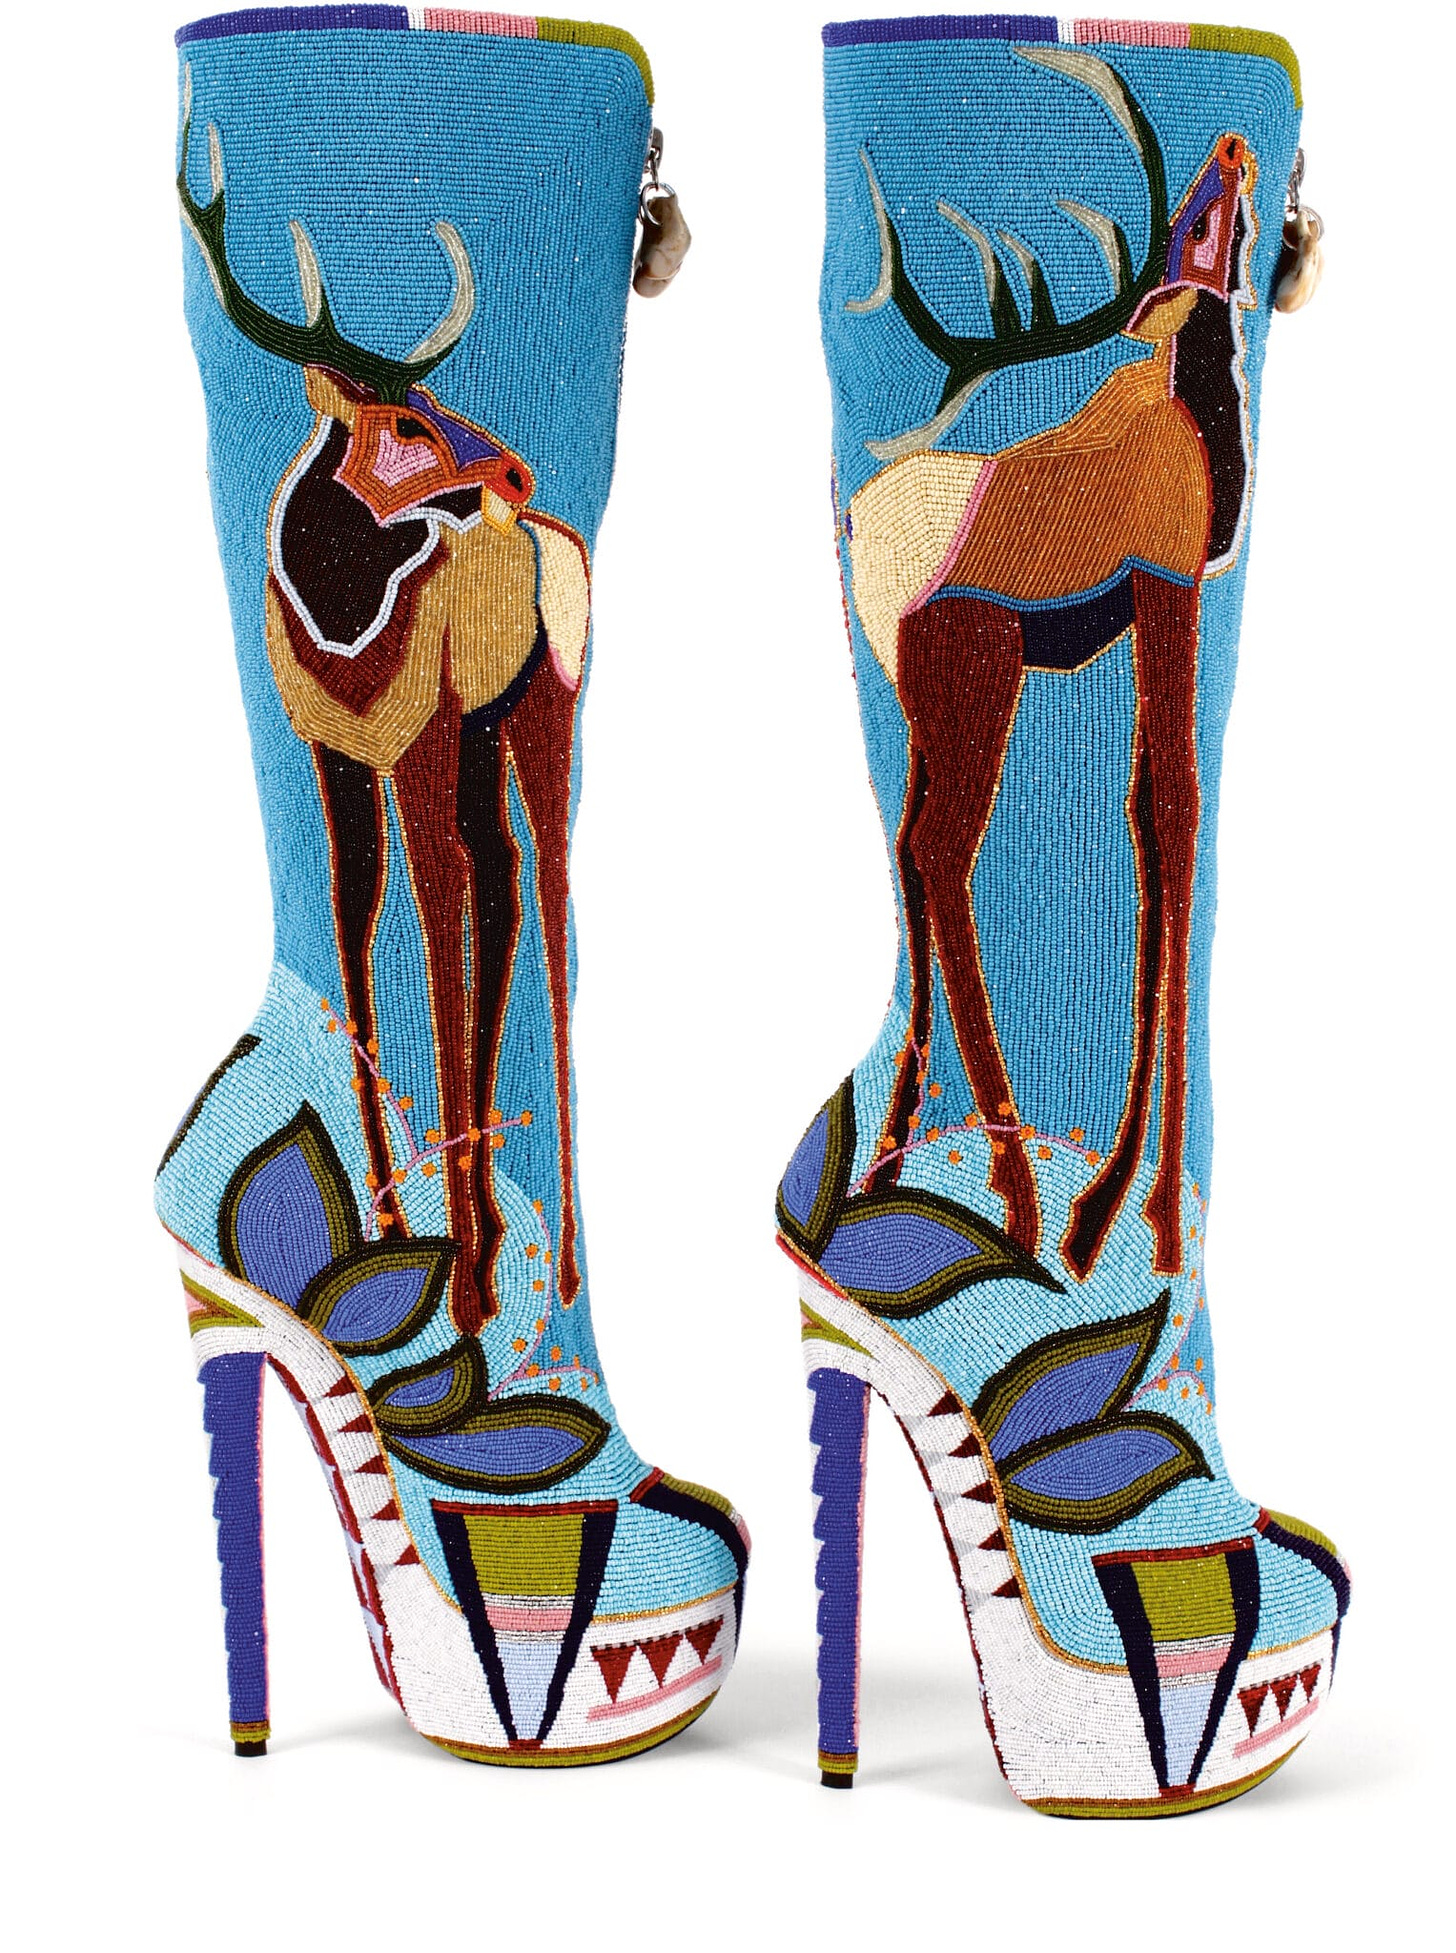 A pair of tall beaded platform heels with iamges of Elk on them, created by Jamie Okuma, an Indigenous artist.